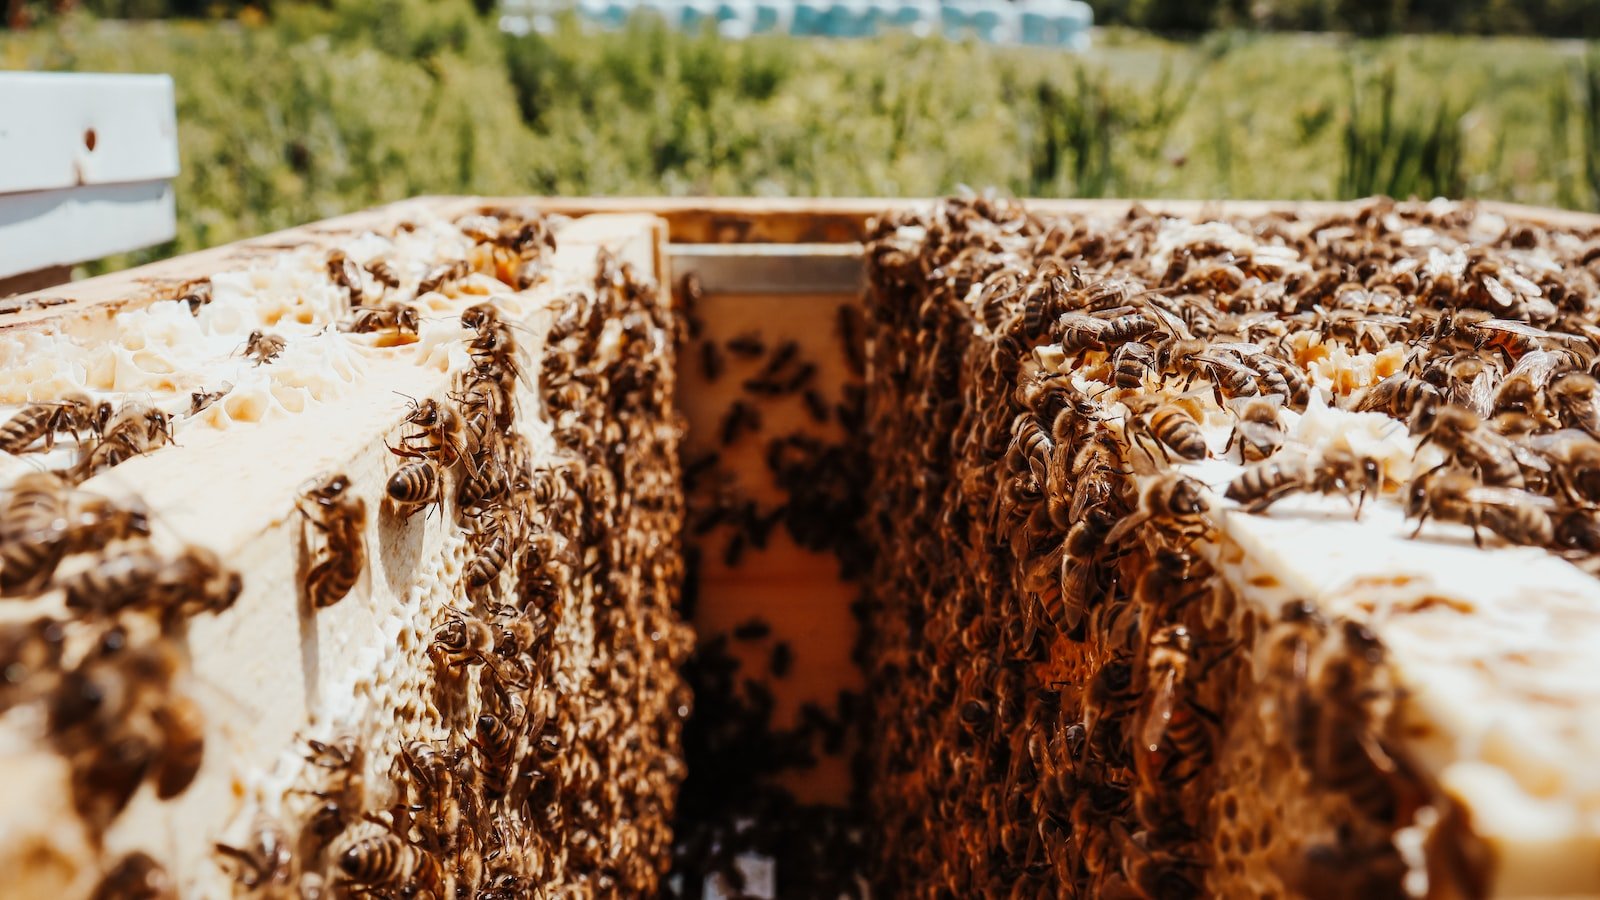 Preparing Your Hive for Transportation